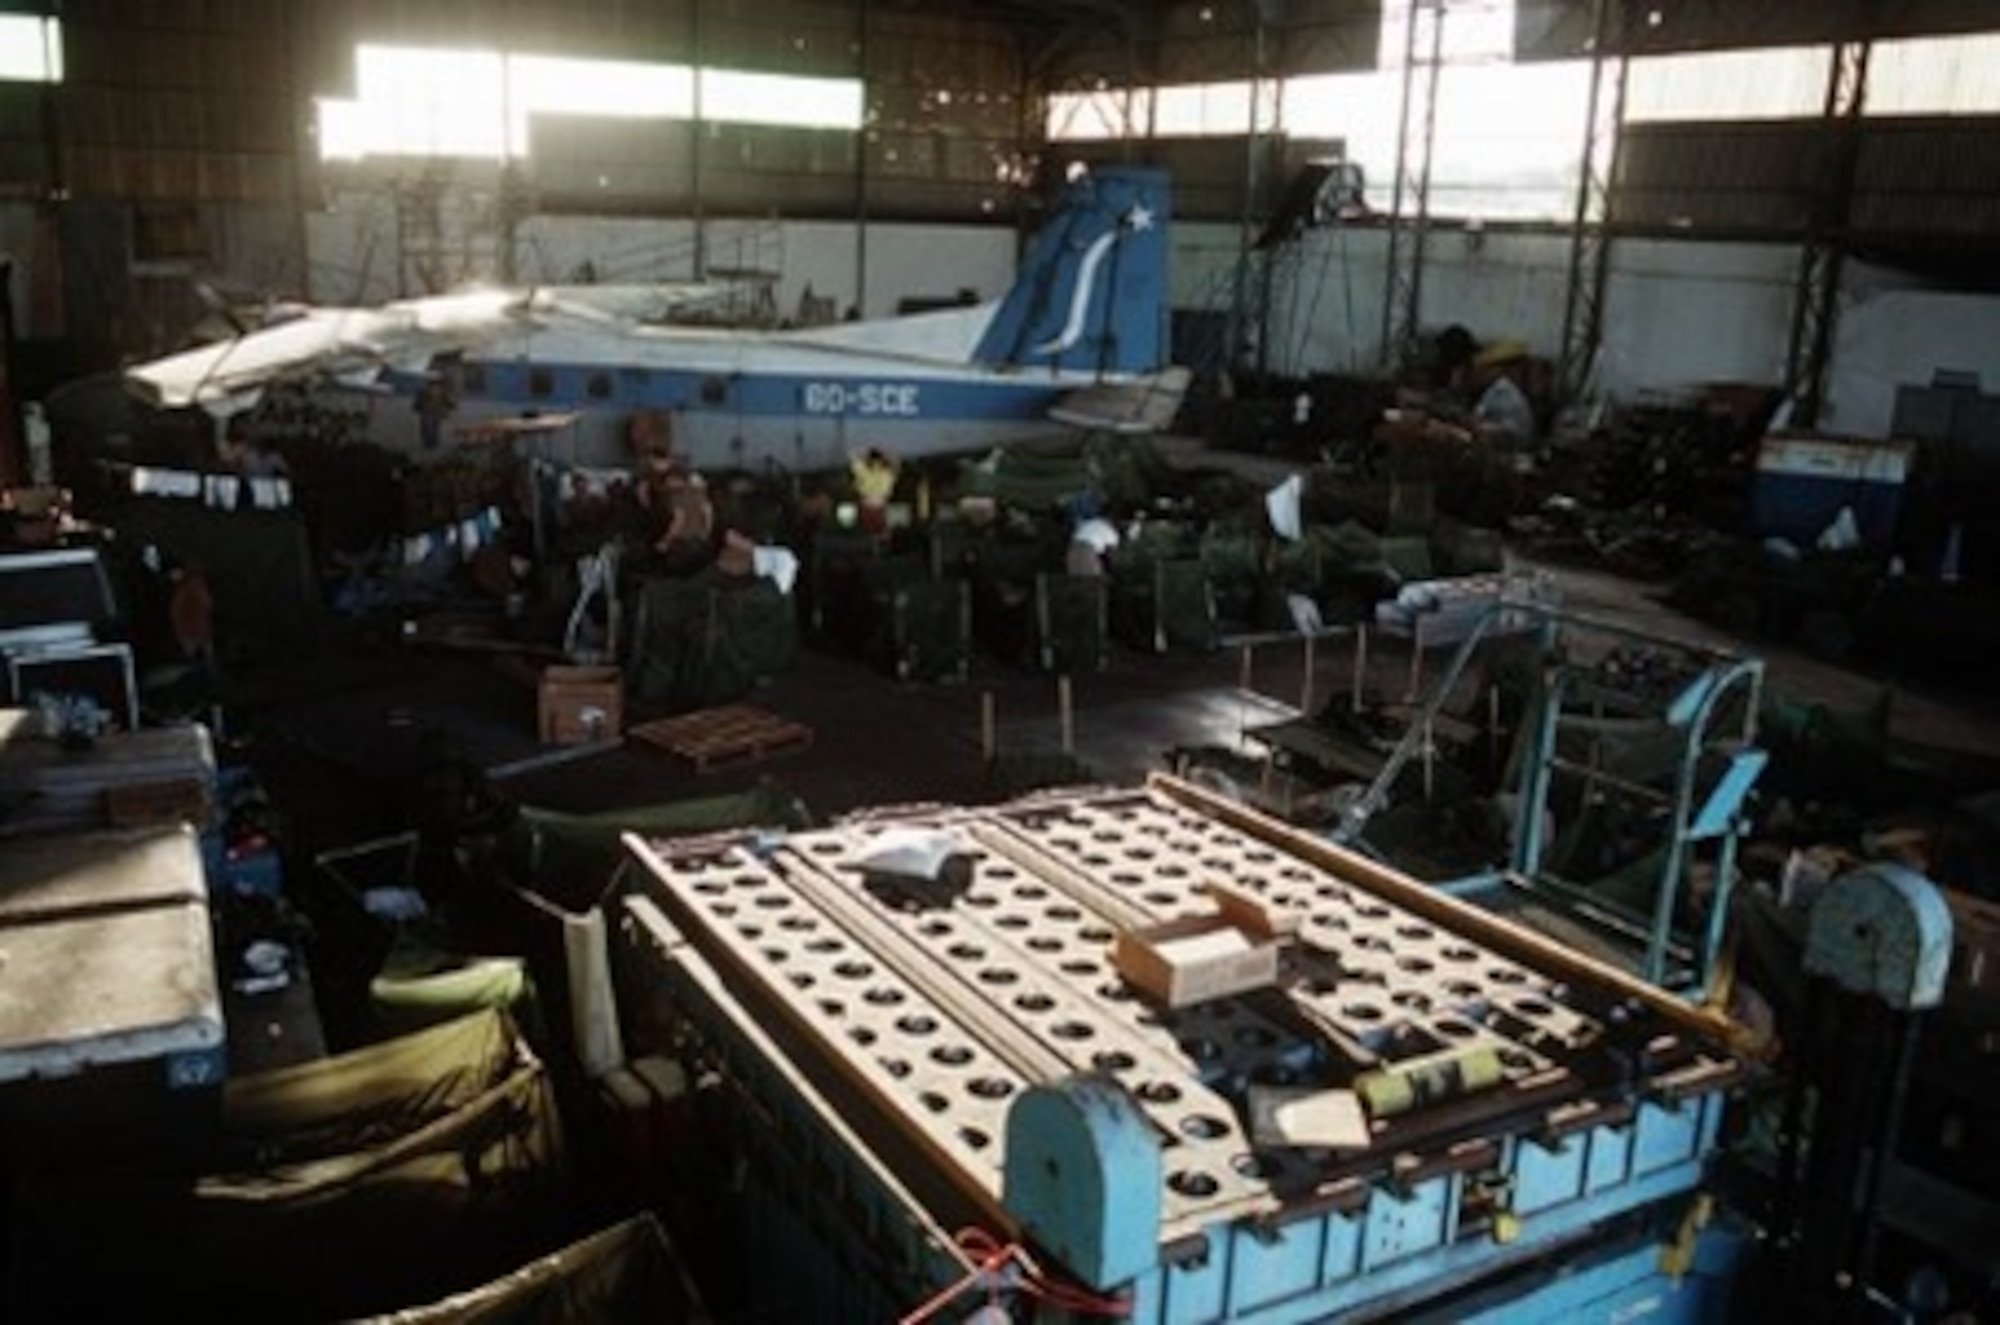 Troops bunking in a hangar at Mogadishu International Airport Dec. 16, 1992. (National Archives Photo)